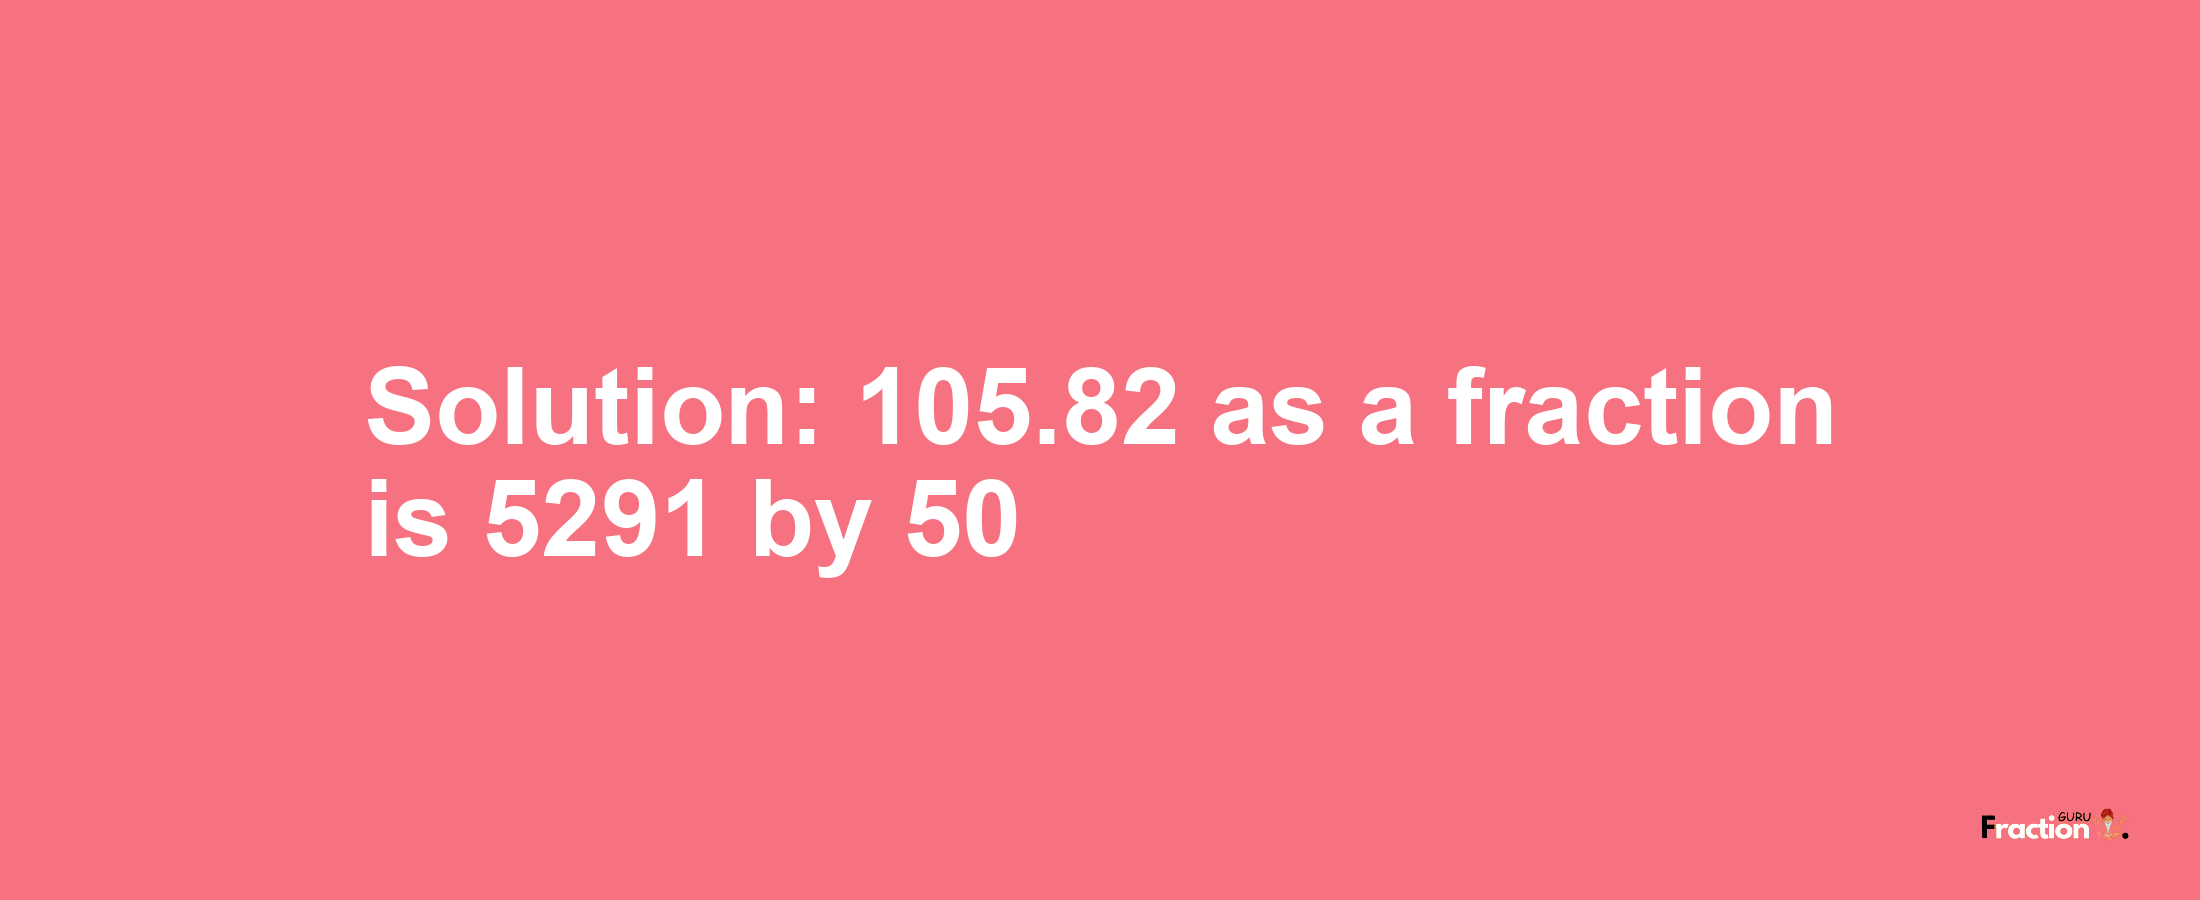 Solution:105.82 as a fraction is 5291/50